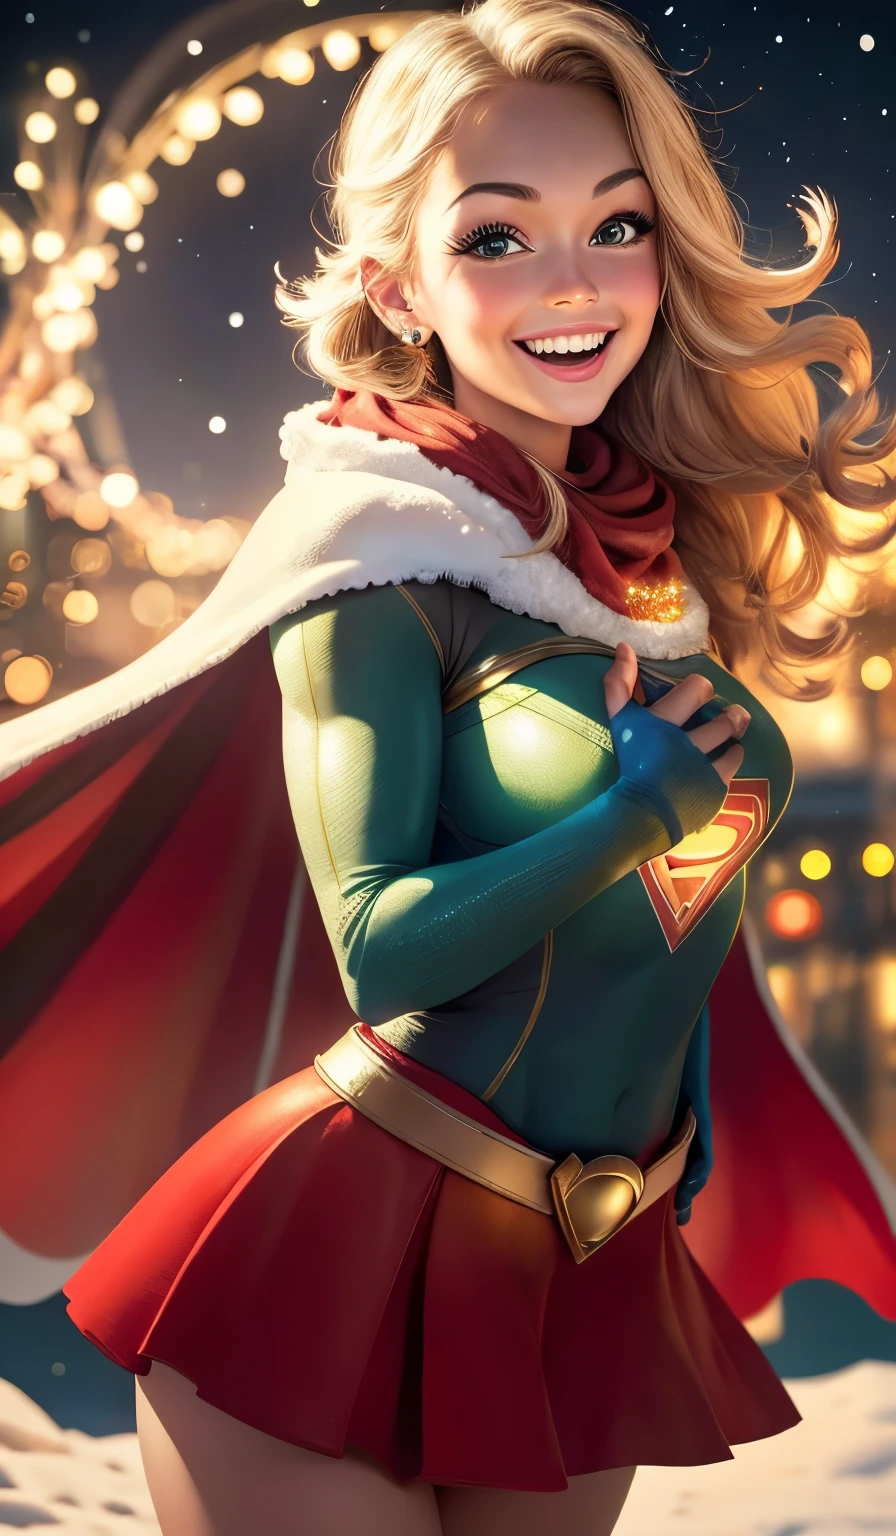 (best quality,4k,8k,highres,masterpiece:1.2),ultra-detailed,(realistic,photorealistic,photo-realistic:1.37),Supergirl wearing a Santa suit,beautiful detailed eyes,beautiful detailed lips,extremely detailed eyes and face,longeyelashes,red cape flowing in the wind,shiny golden tiara,costume with vibrant red and white colors,golden belt with a large "S" symbol,gloves with white trim and the "S" symbol on the back,flying in the sky with skyscrapers and snow-covered rooftops below,fairy lights twinkling in the background,graceful and confident pose,smiling with joy,sparkling snowflakes falling around her,city covered in a blanket of snow,glowing moon shining brightly,celebratory atmosphere,urban landscape decorated with Christmas lights and ornaments,children below looking up in awe,warm and inviting ambiance,cheerful and festive mood,colorful presents scattered on the ground in front of her,powerful and awe-inspiring presence,bokeh lights adding a magical touch,holiday spirit in the air,excitement and anticipation for Christmas,world filled with hope and happiness.
lamplight： 
The scene is softly lit with warm yellow light, casting a gentle glow on Supergirl's face and illuminating the surrounding area. The moonlight bathes the landscape in a soft, silvery light, creating a dreamy and enchanting atmosphere. The city below is adorned with colorful Christmas lights, adding a festive and joyful ambiance to the scene. The fairy lights in the background twinkle and create a magical aura, enhancing the overall charm of the artwork.